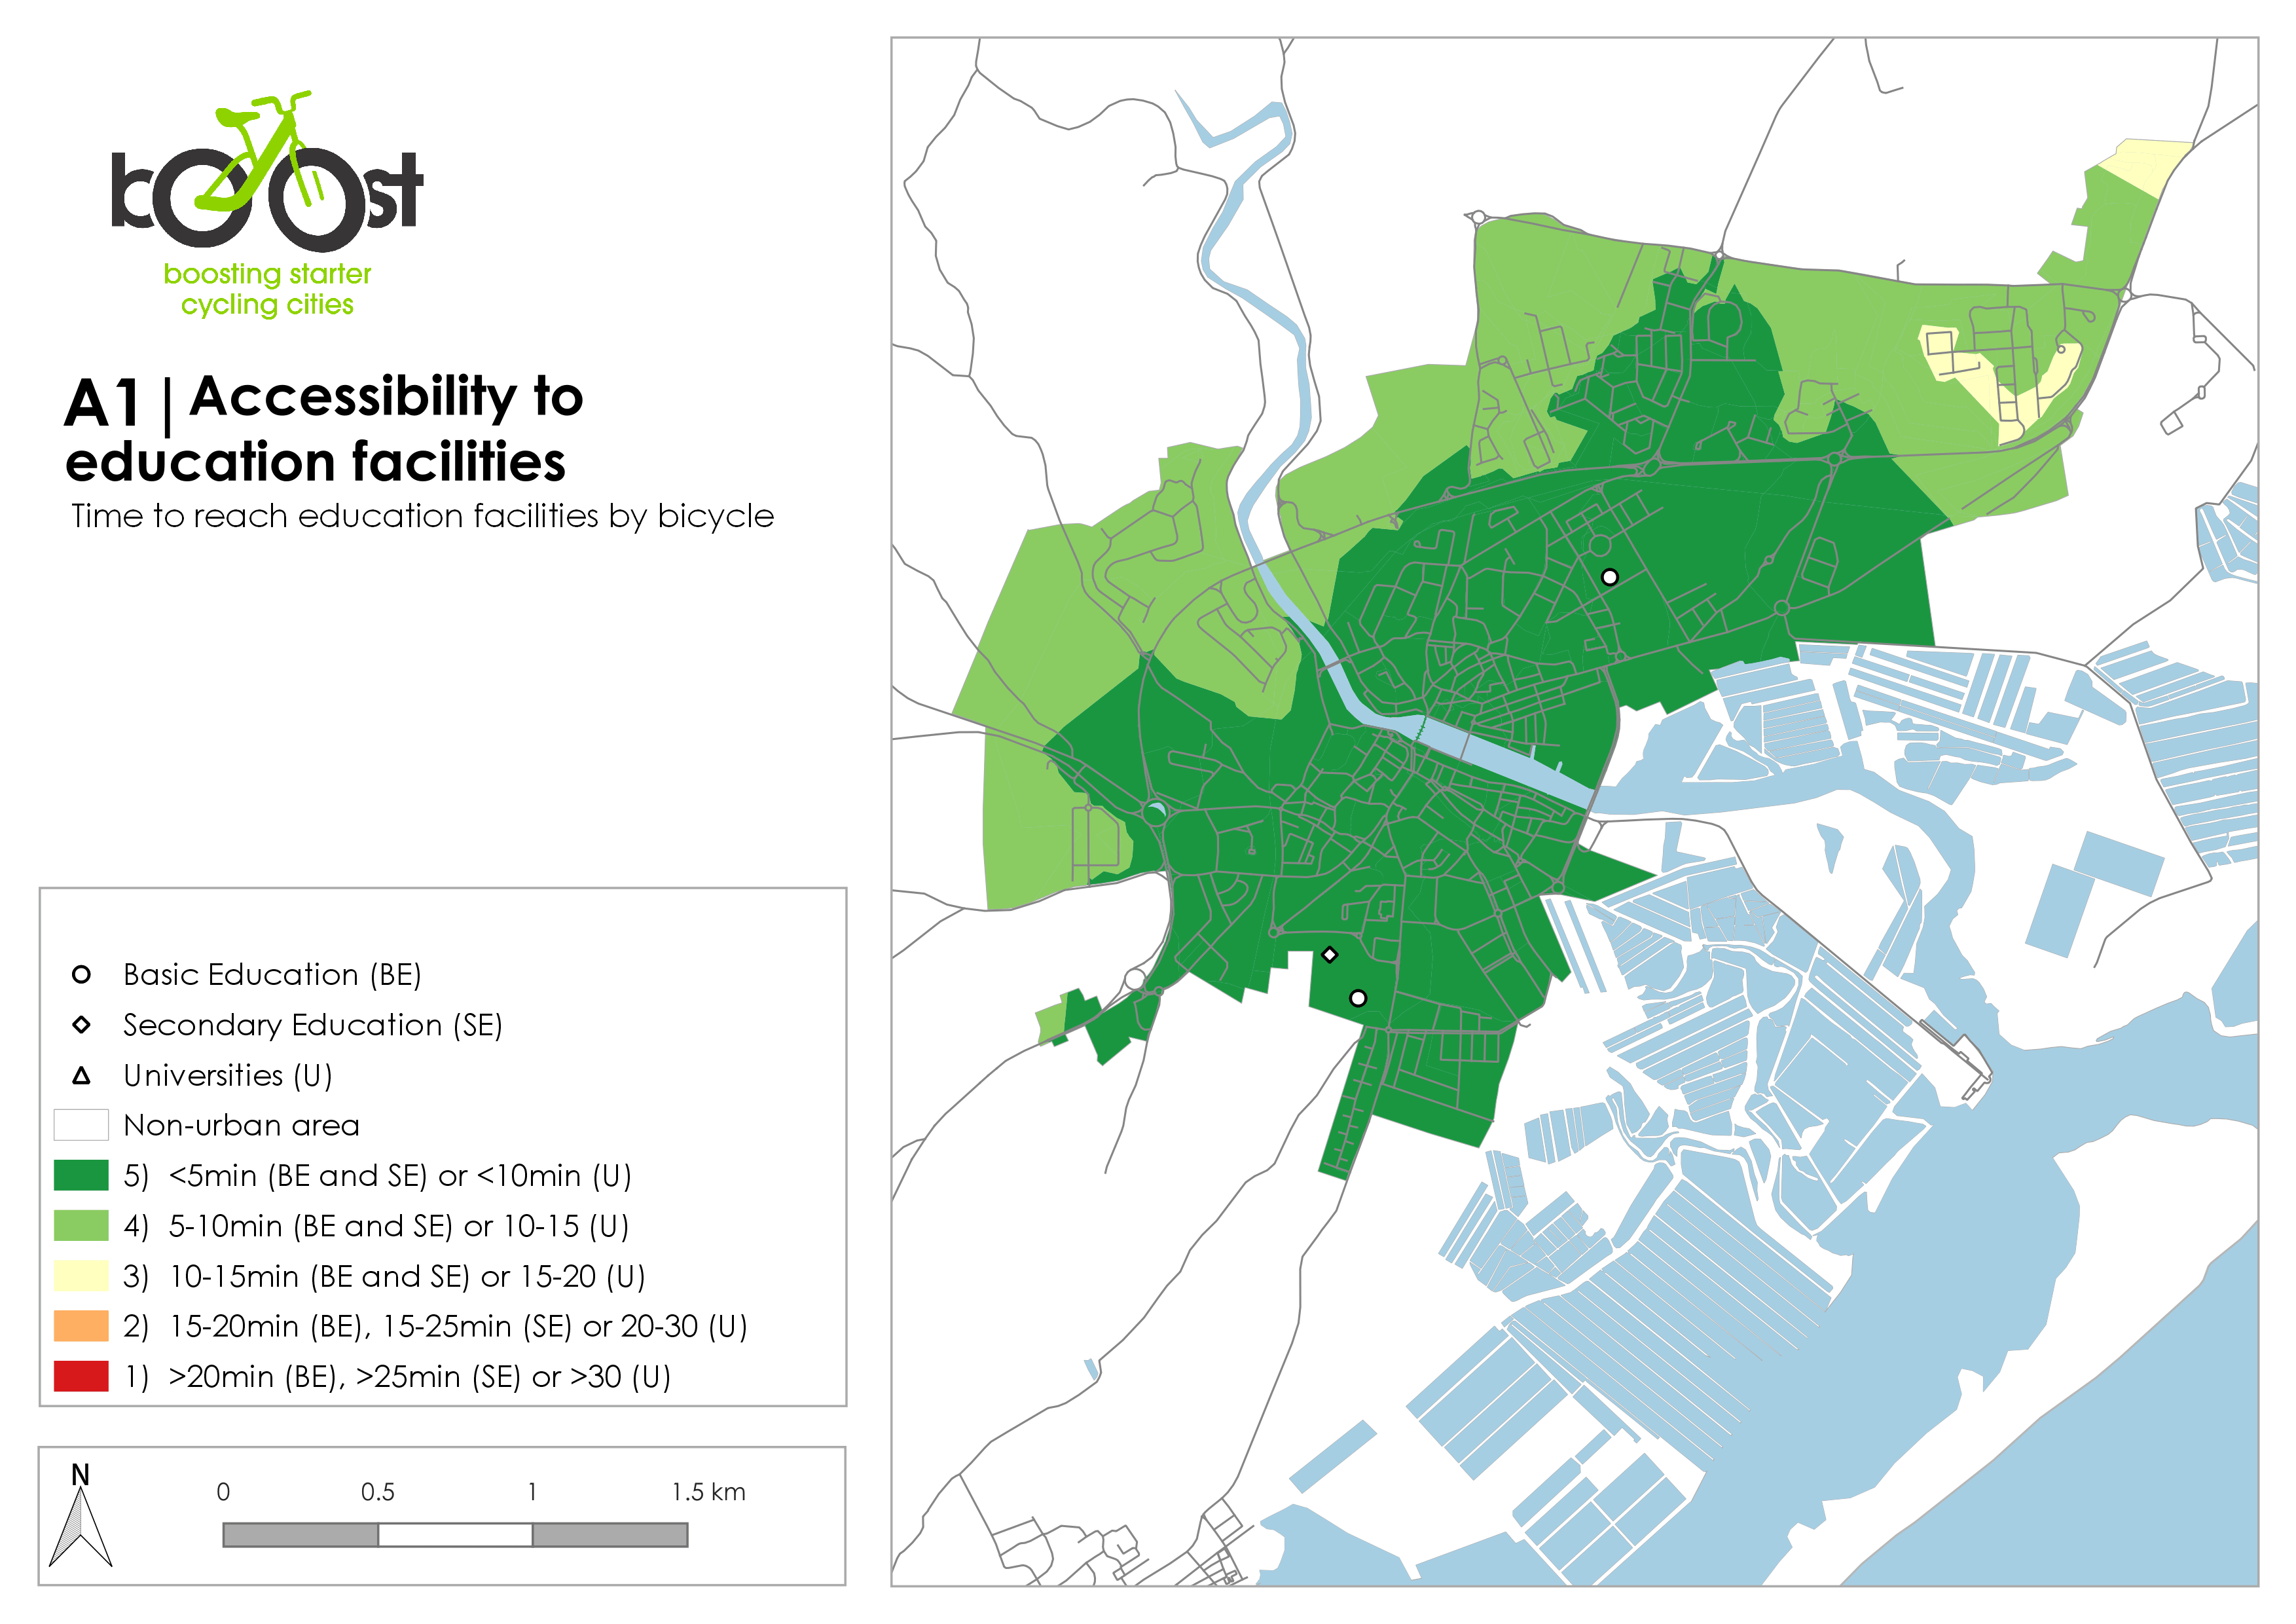 A2 | Accessibility to centralities